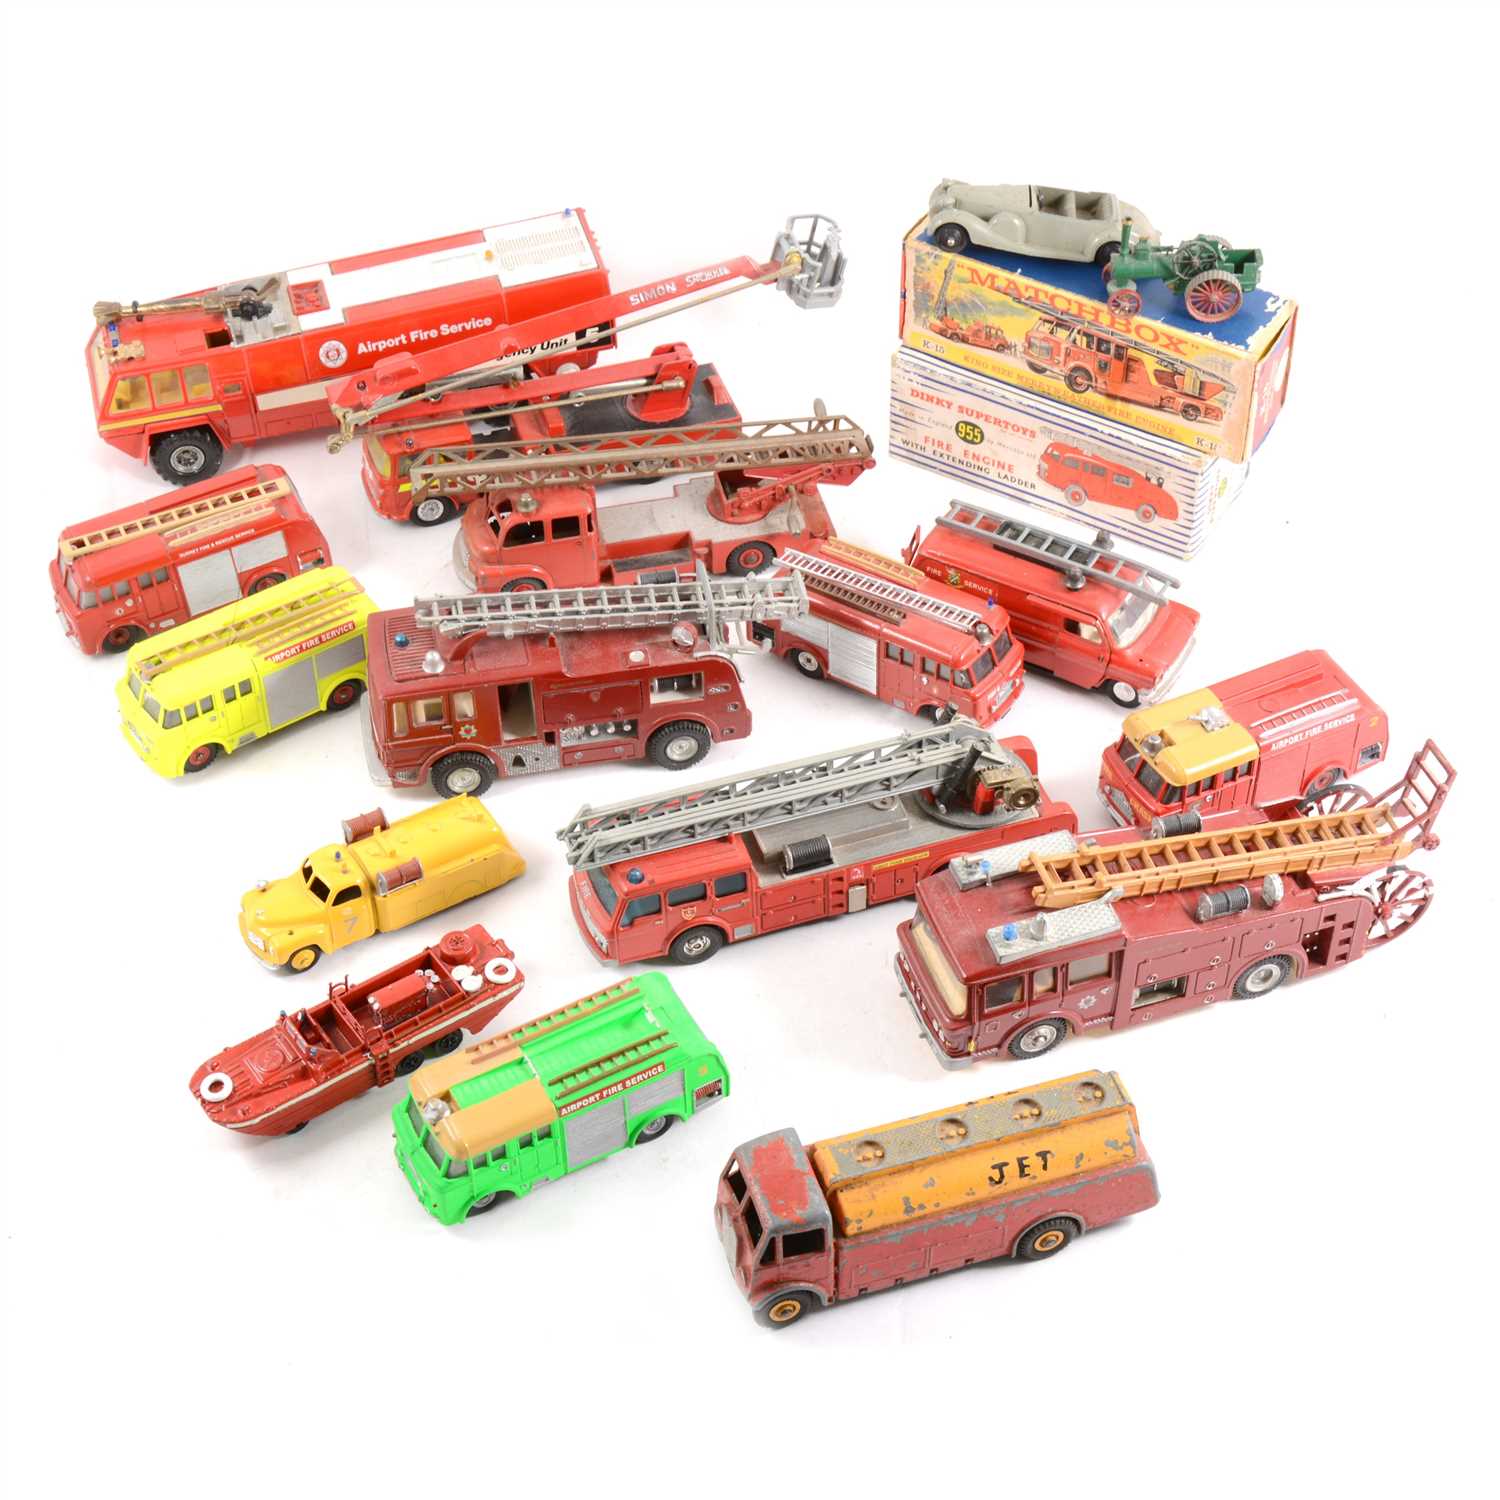 Lot 141 - Dinky Toys and Corgi Toys fire services related die-cast models; including Dinky, Corgi and Matchbox.